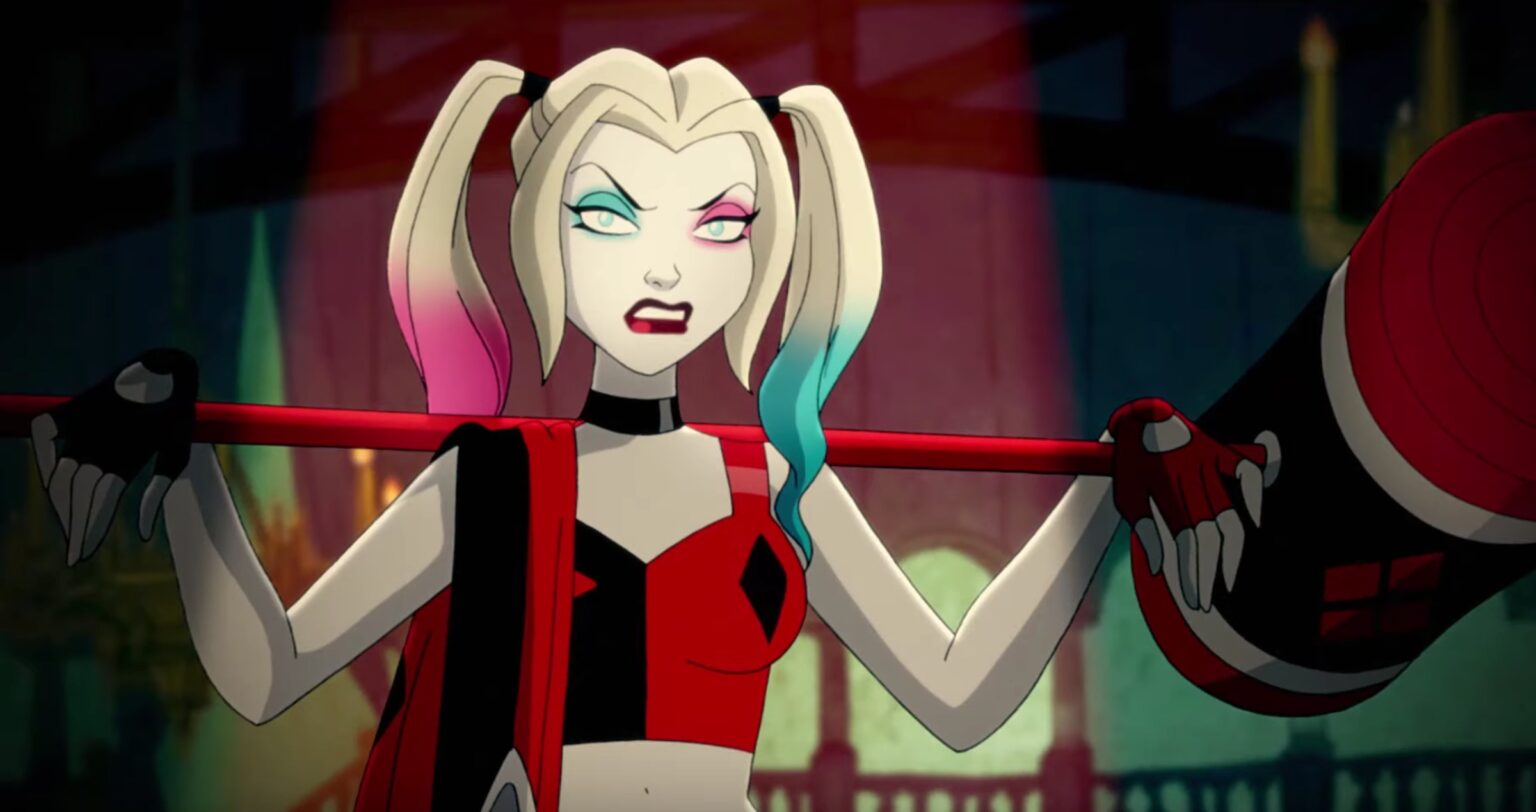 'Harley Quinn' has officially been renewed for season 3. Here's all the details surrounding the animated series.